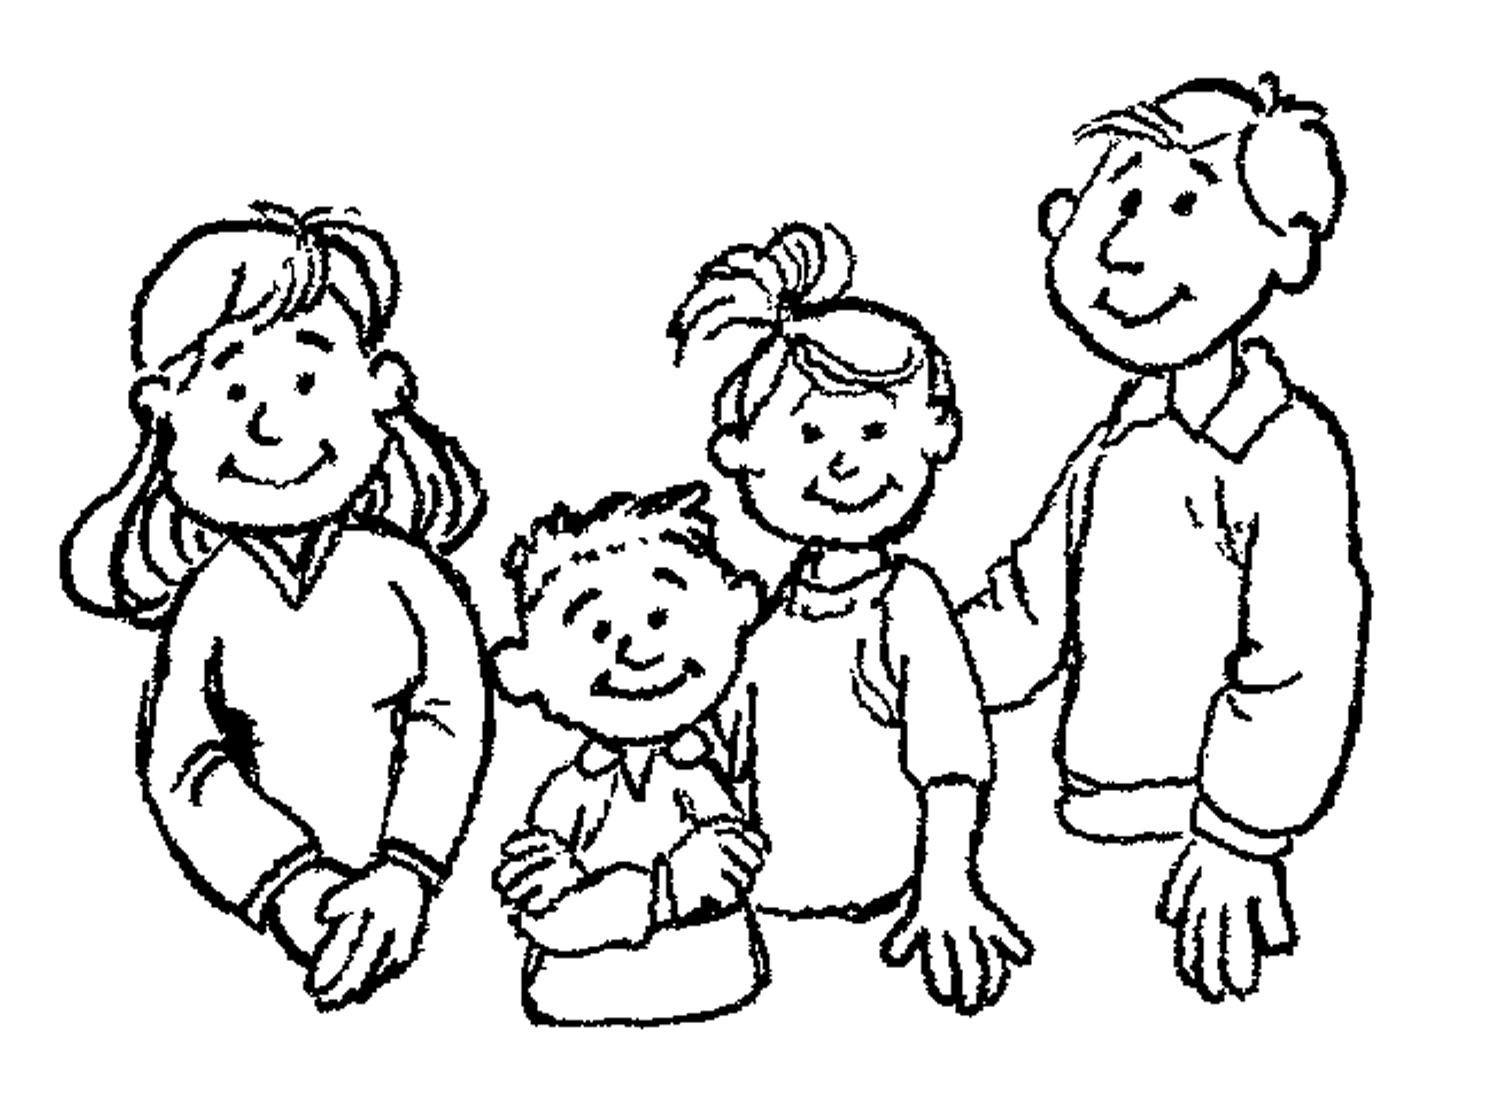 Free Family Clipart Black And White, Download Free Family Clipart Black